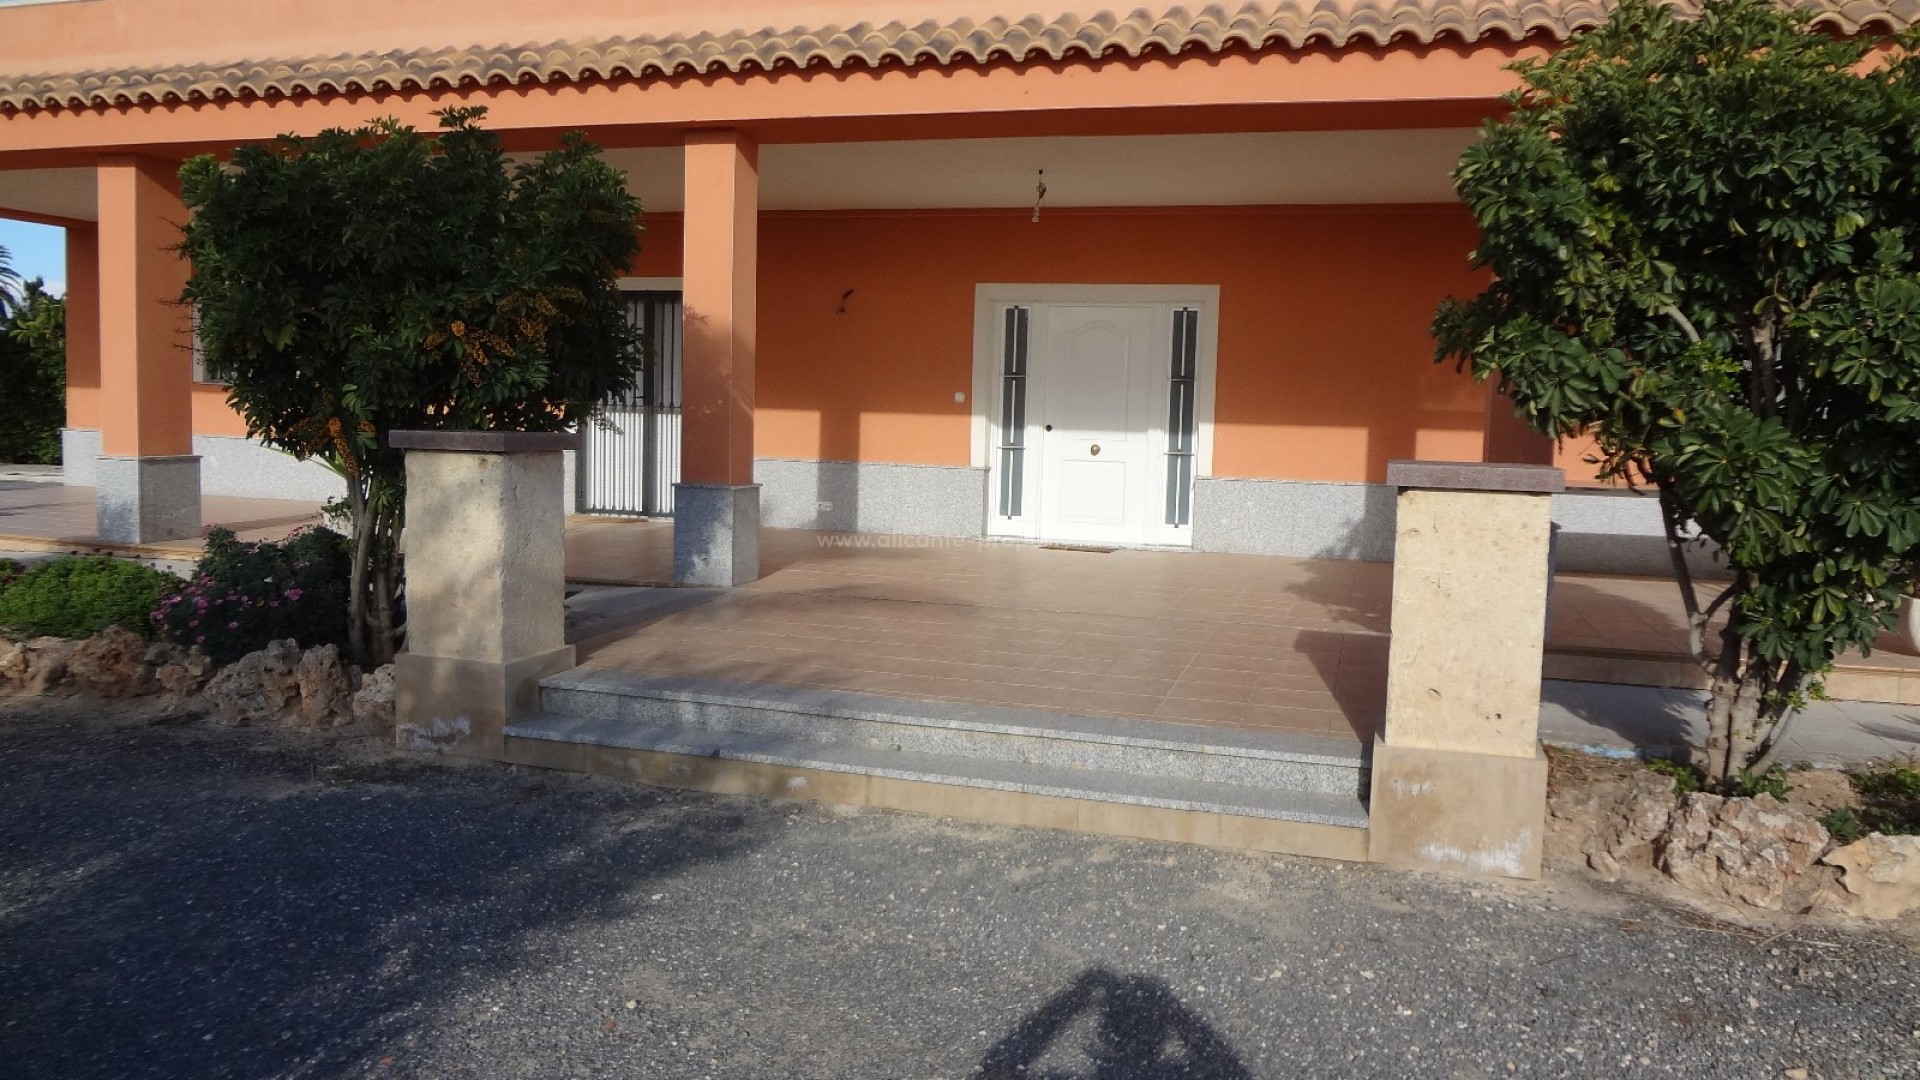 Country Property in El Altet